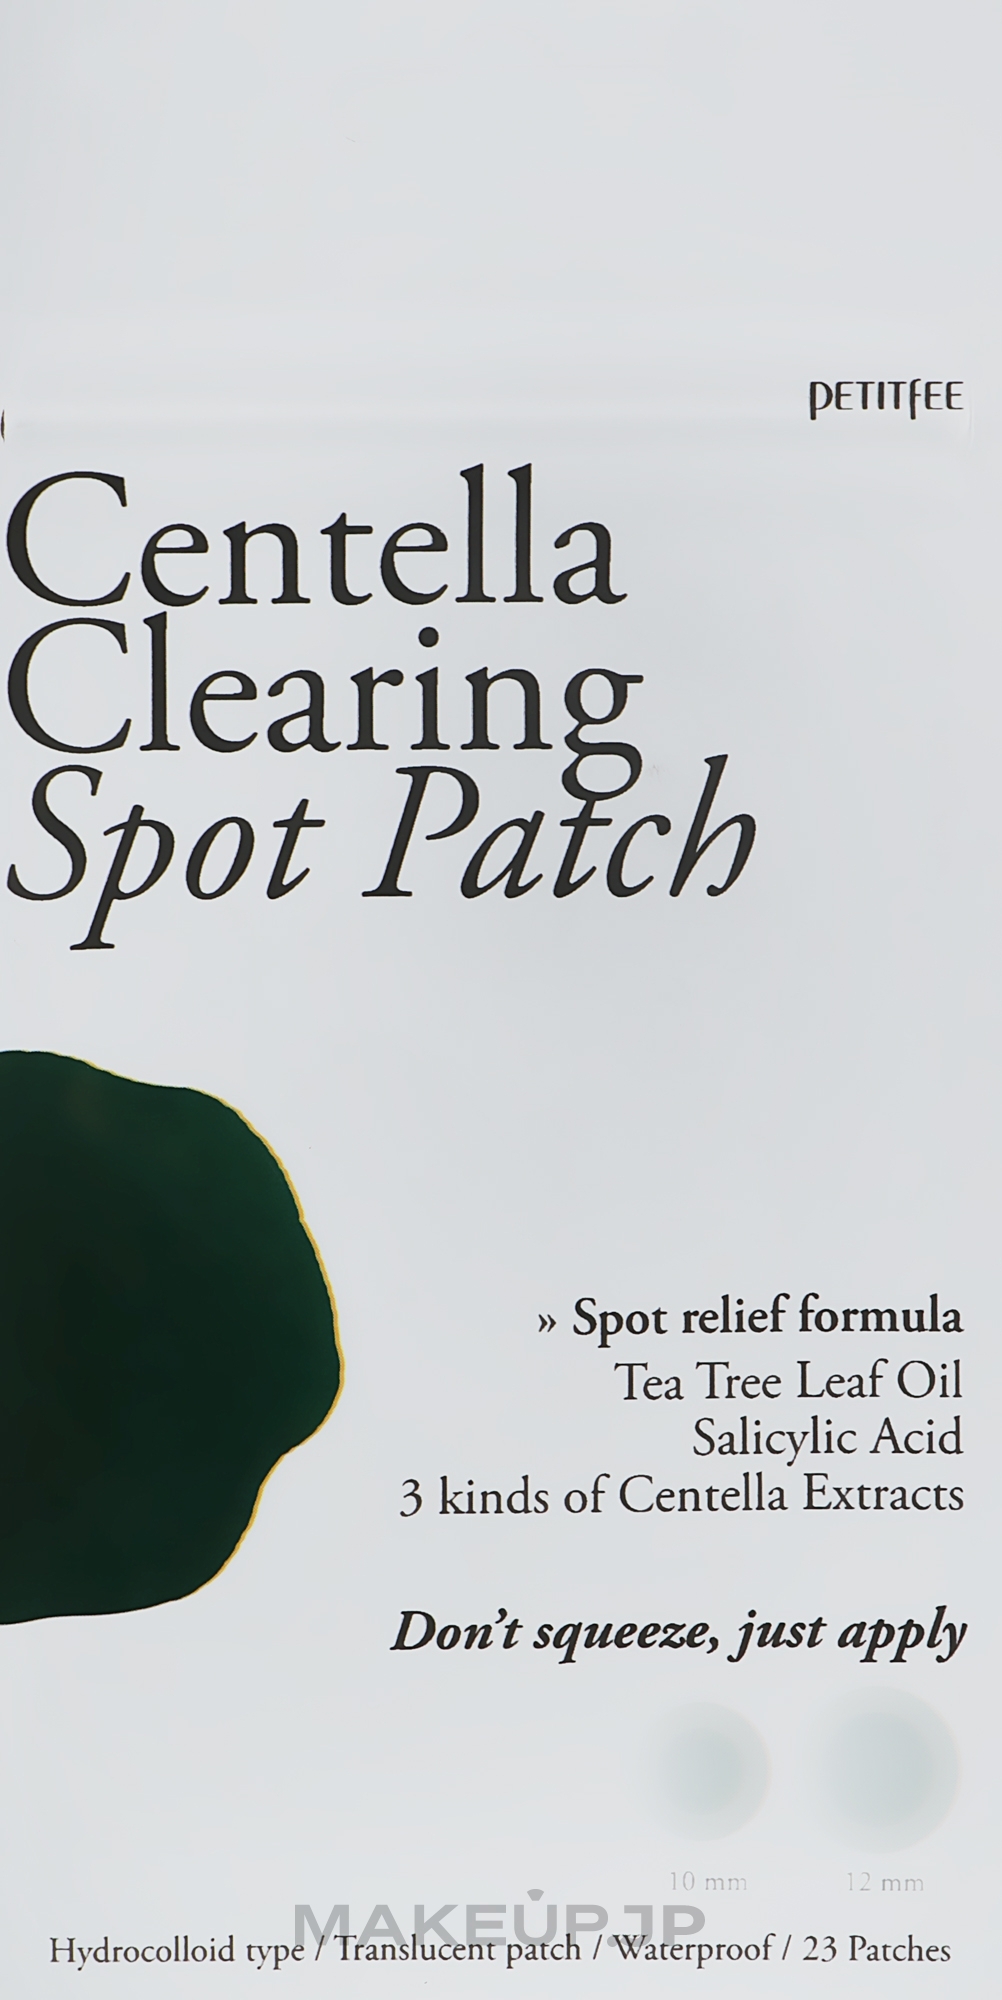 Anti-Inflammation Spot Patches with Centella Asiatica Extract - Petitfee Centella Clearing Spot Patch — photo 23 x 6 g